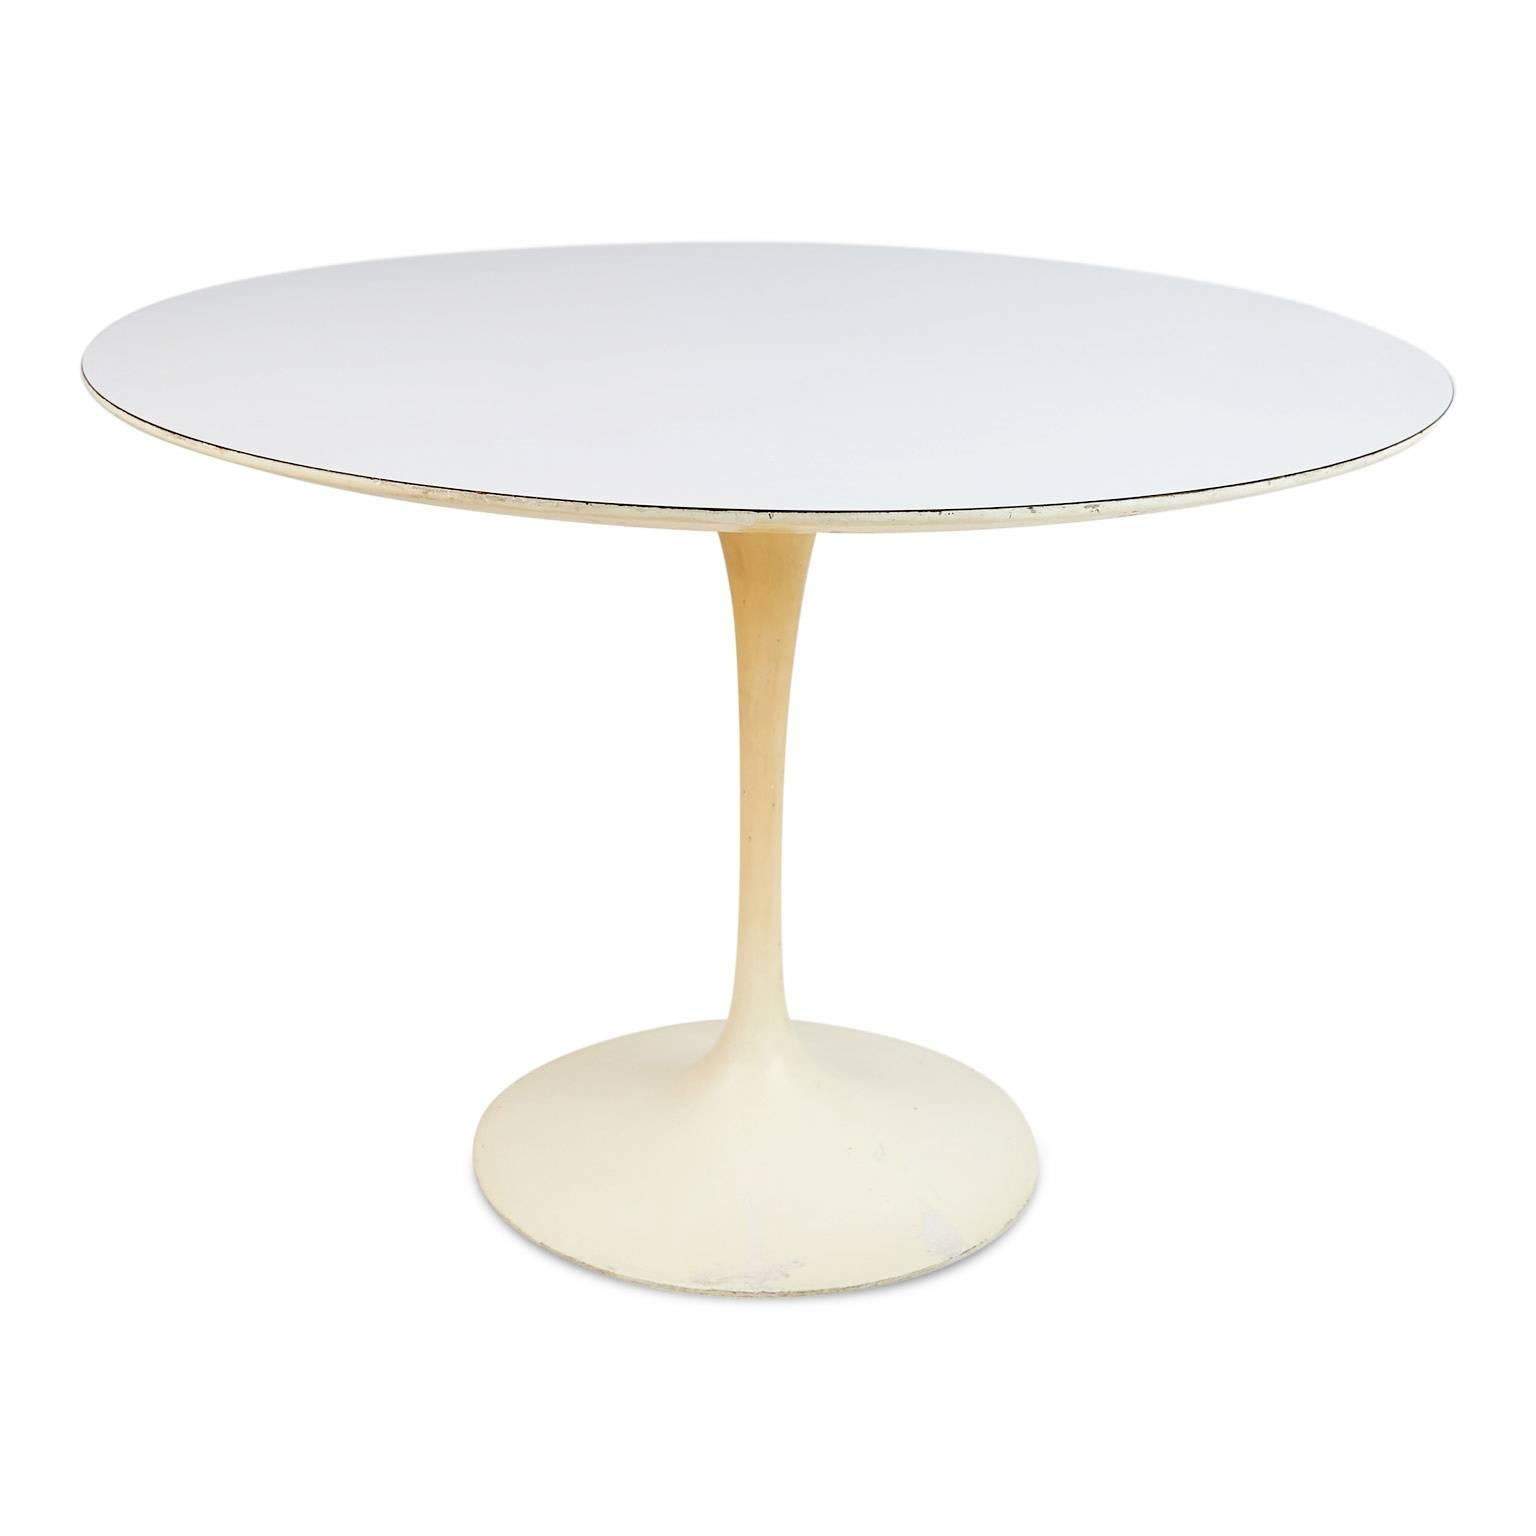 This rare original 1st-Generation production Tulip dining table by Eero Saarinen for Knoll Associates retains the Early 320 Park Ave Knoll Associates 